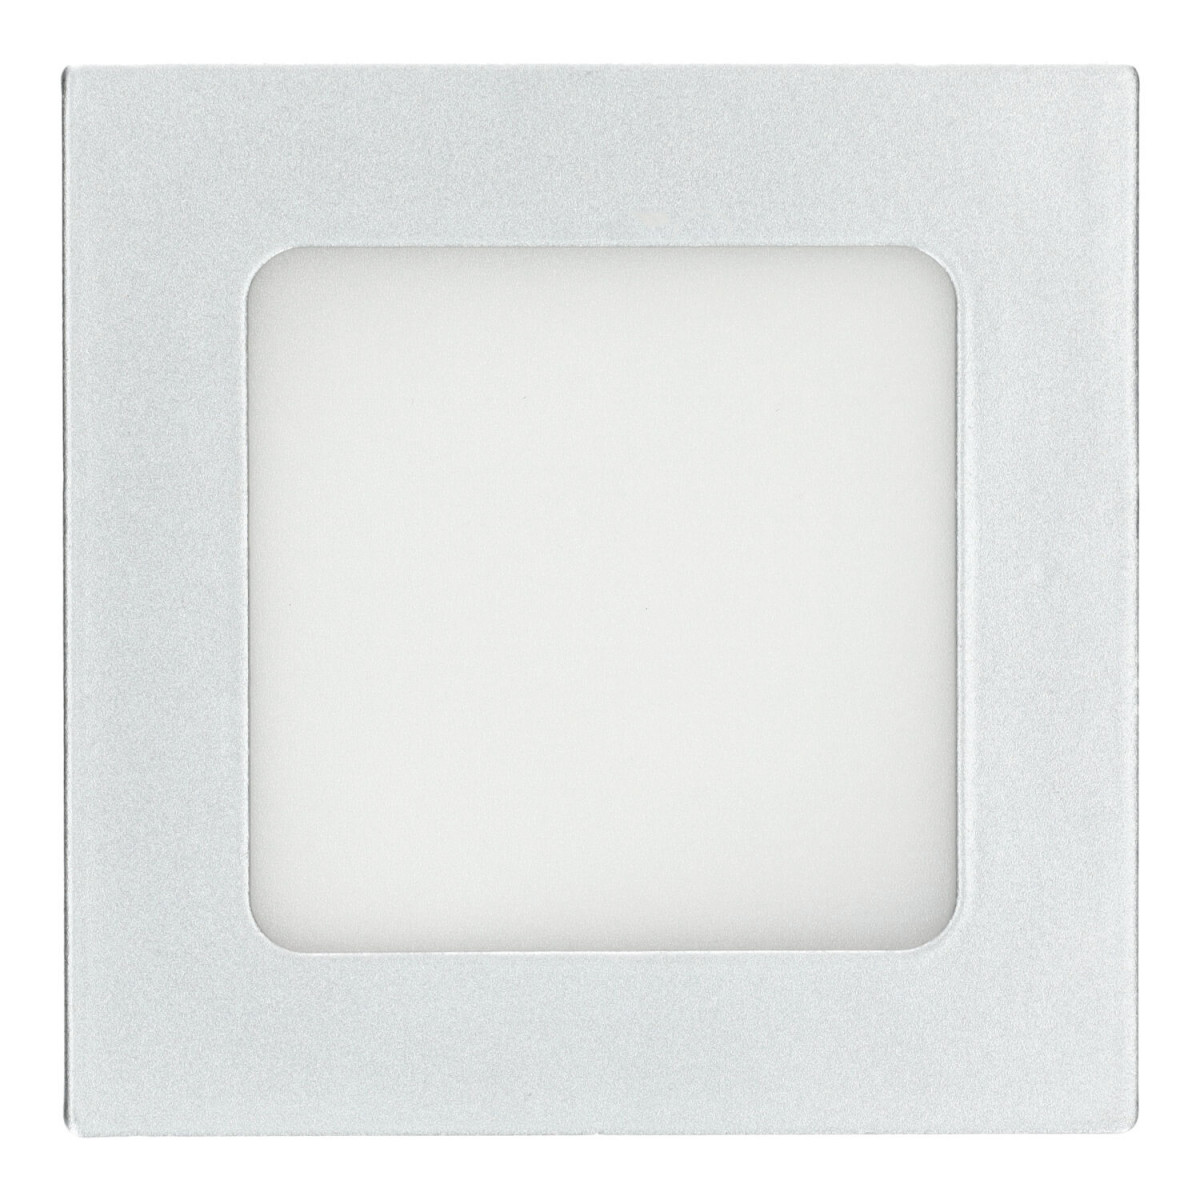 LED Downlight - SILVER Square 6W Panel